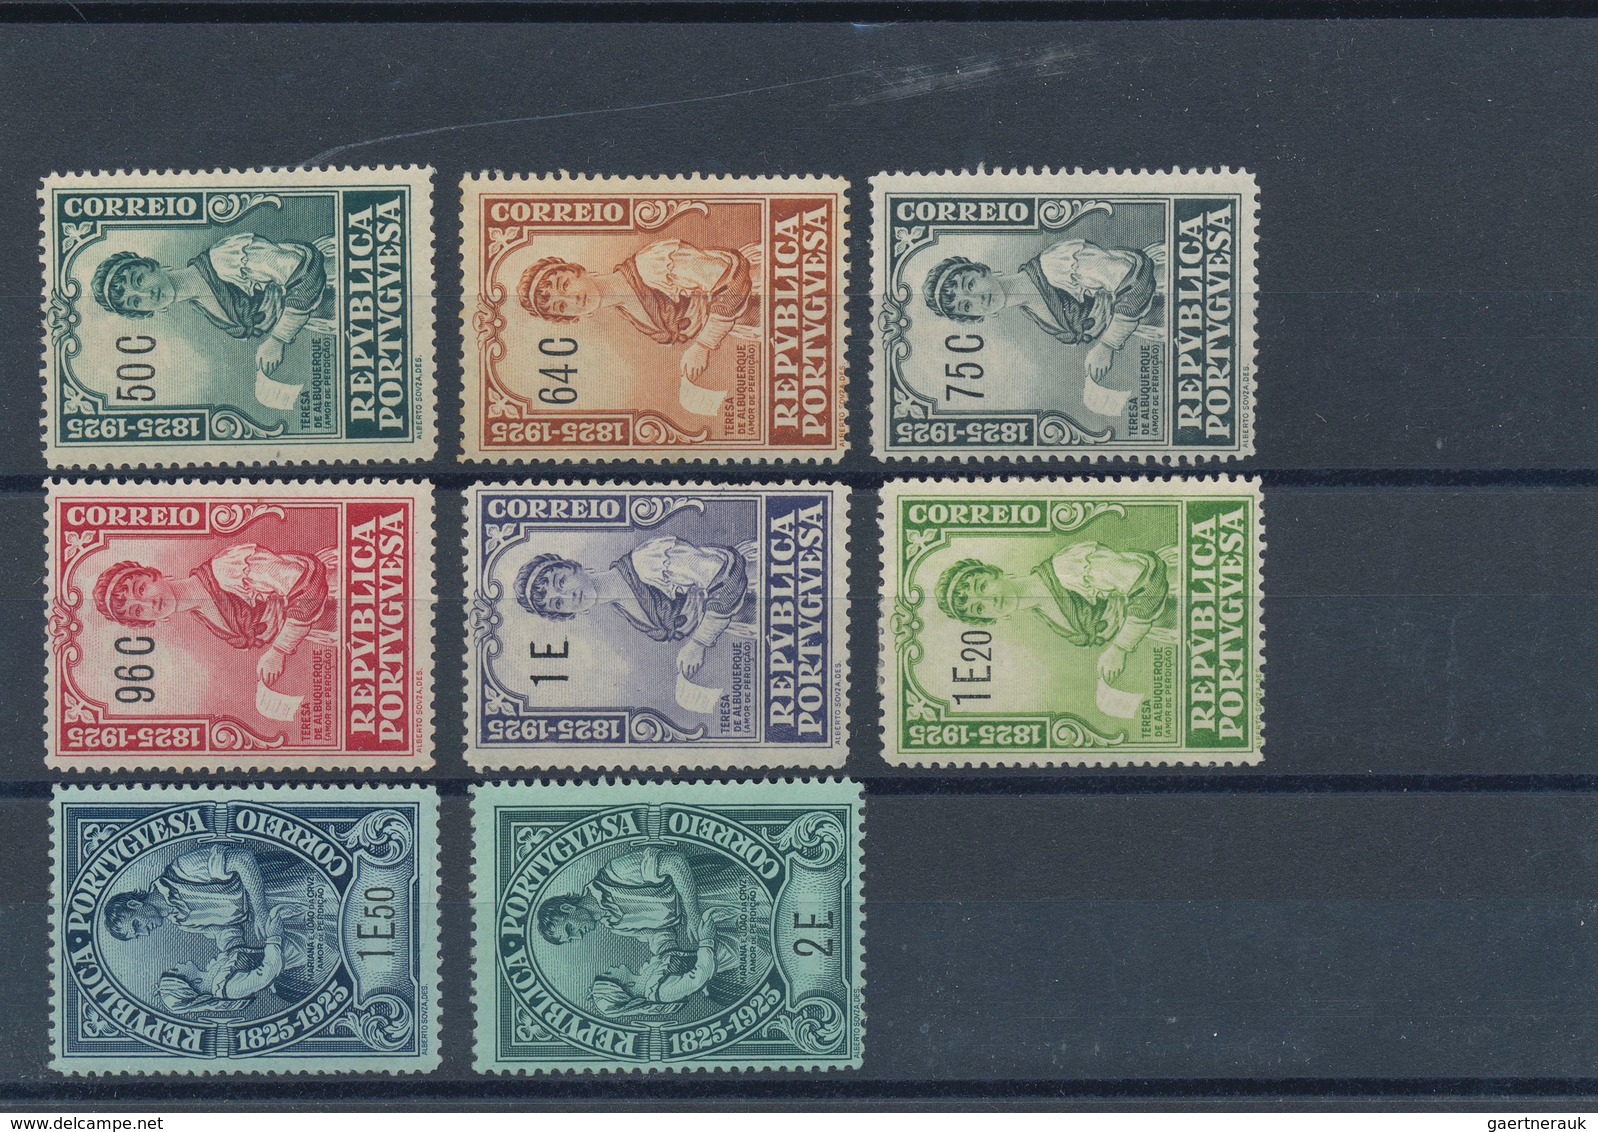 Portugal: 1923/1984, substantial accumulation on stockcards with 50 sets "First flight Lisboa-Brasil